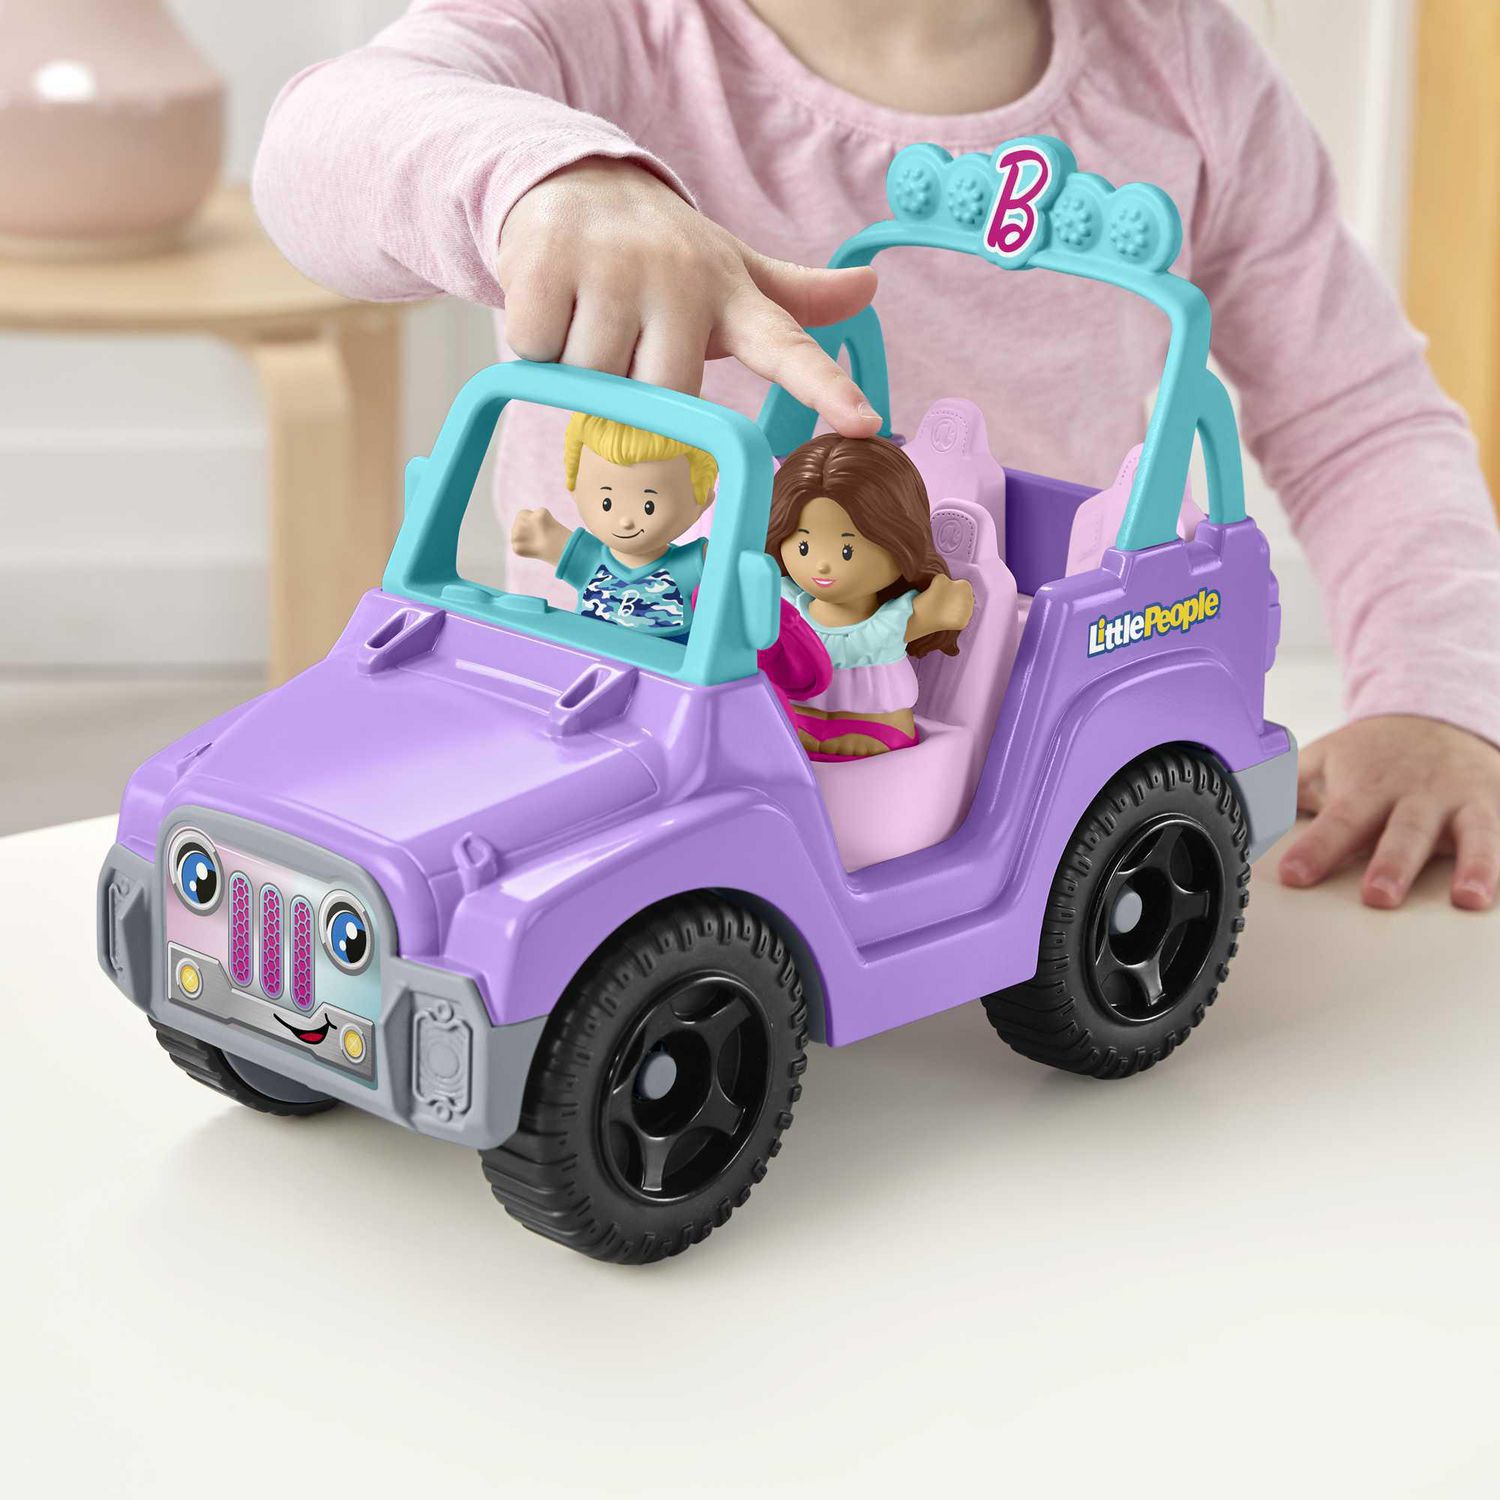 Little People Barbie Beach Cruiser - Sounds Only Version, Ages 2-5